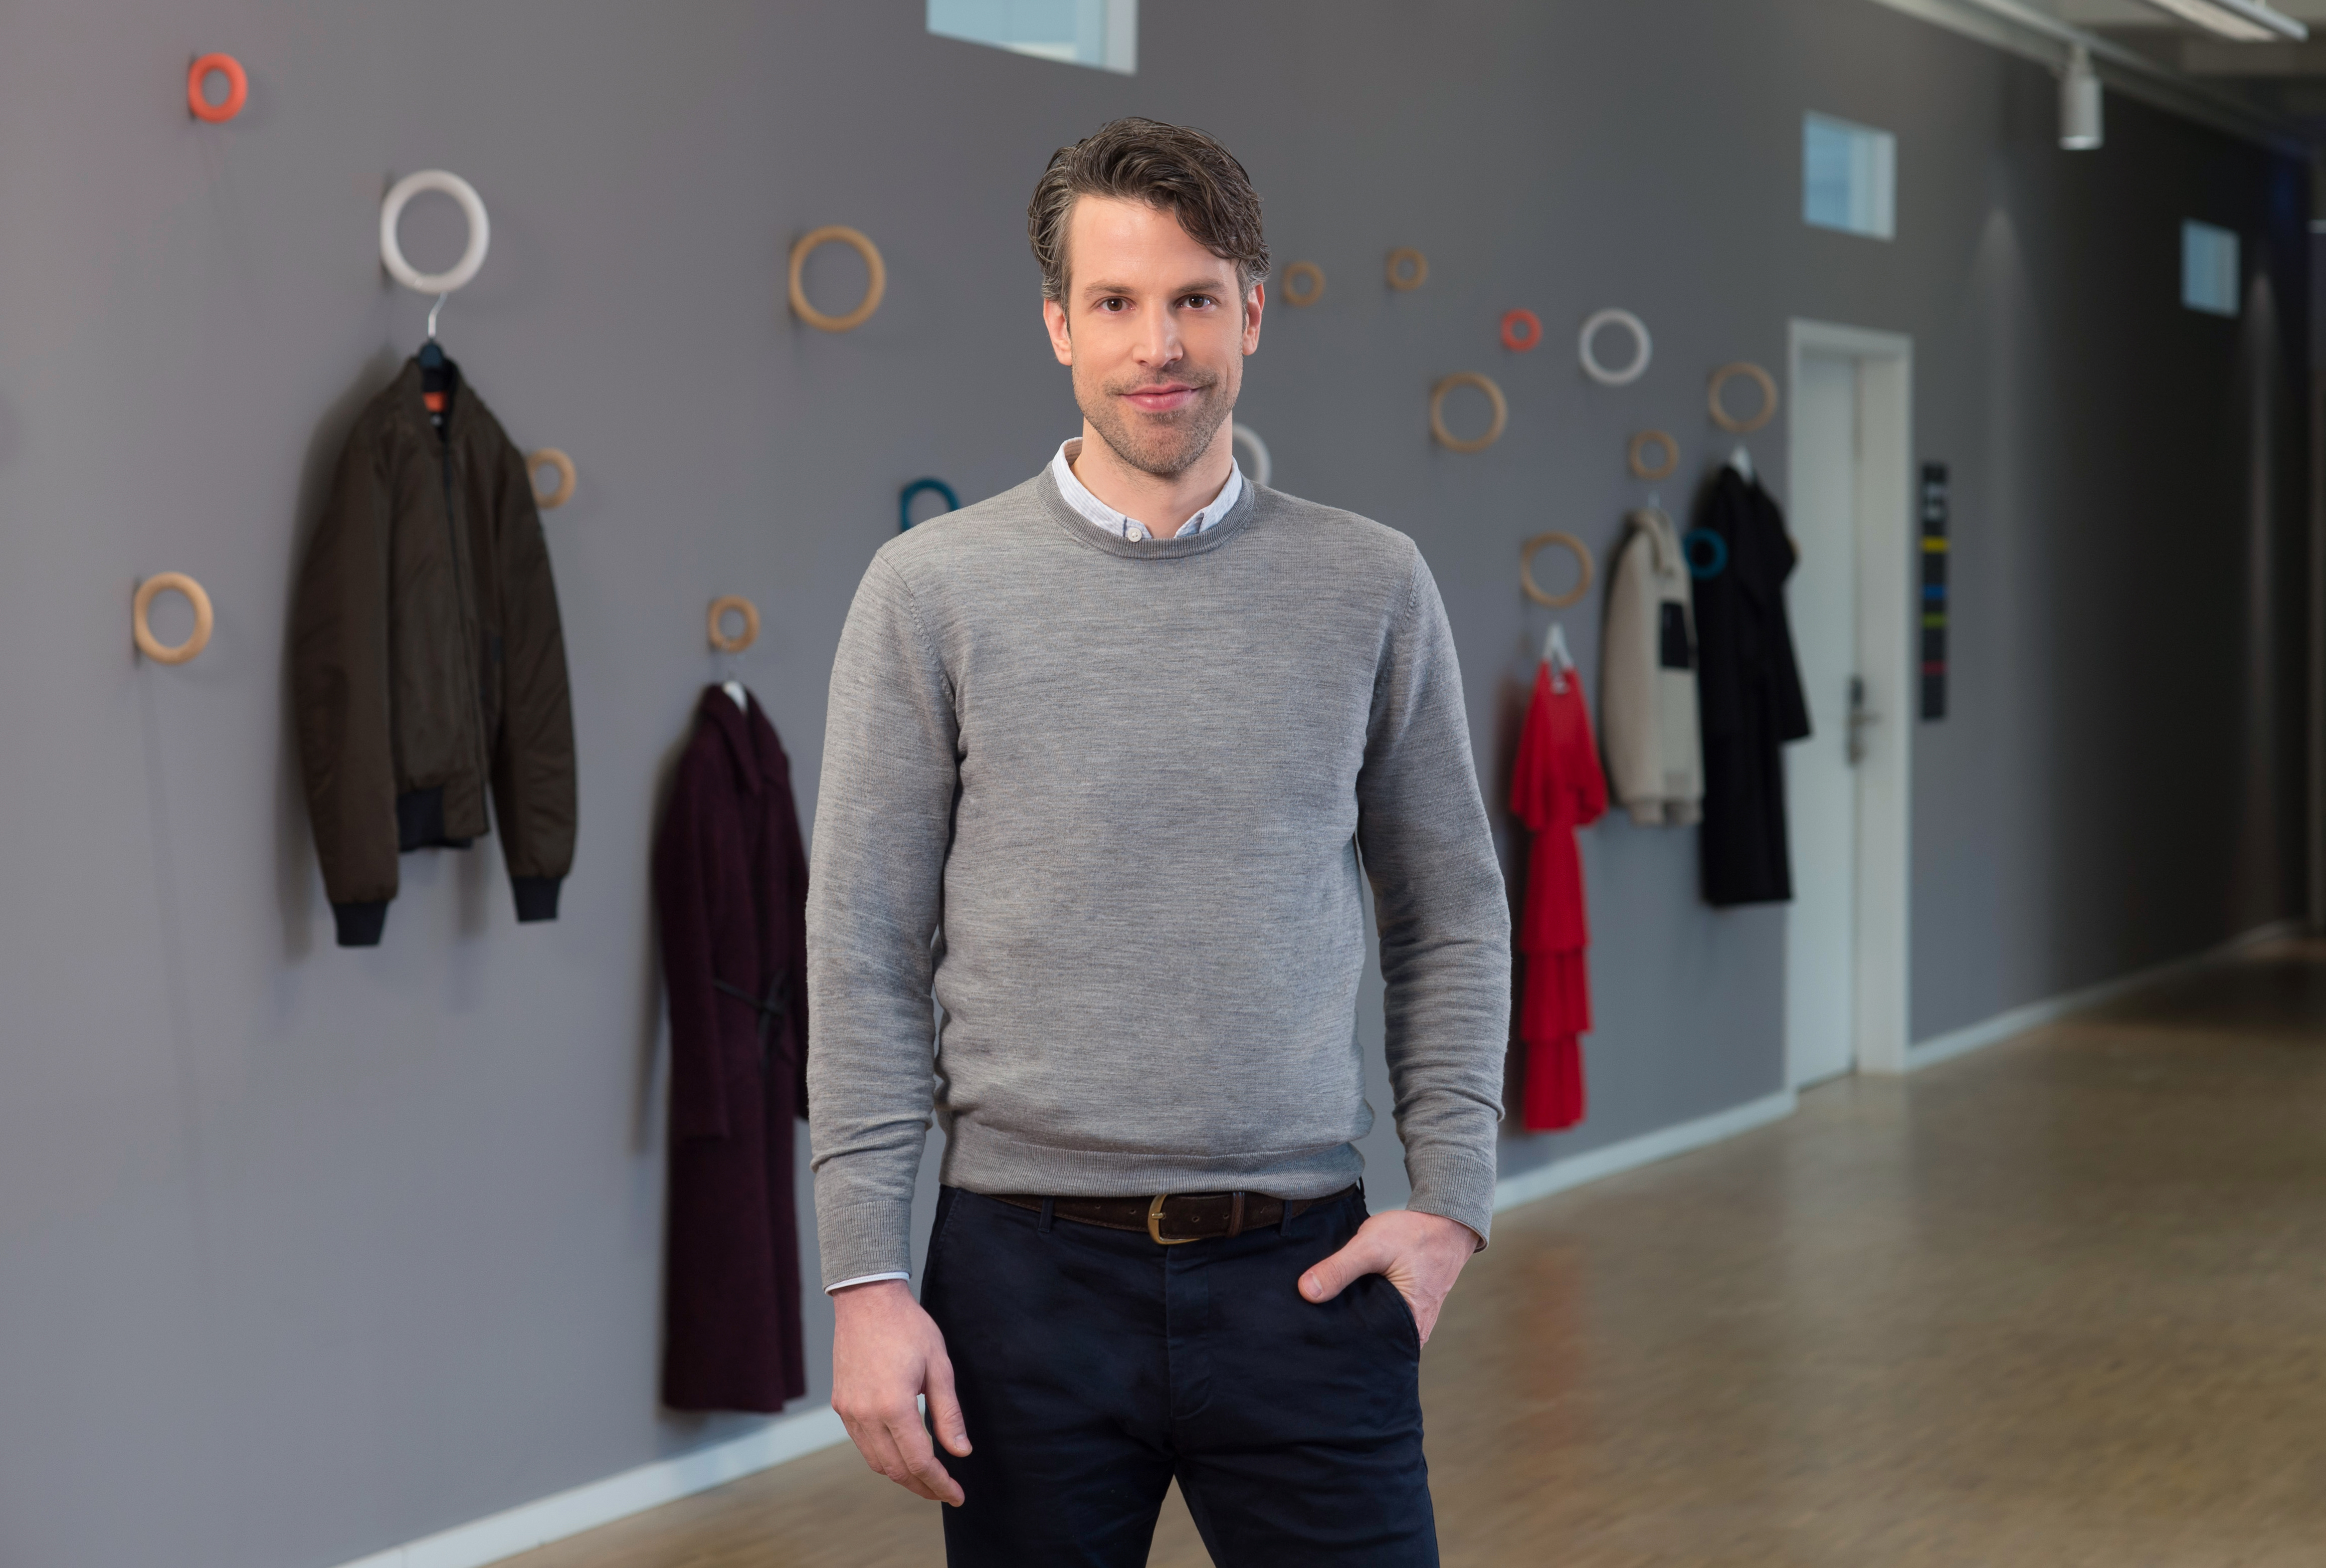 Senior Vice President of Commercial Business for the Zalando Fashion Store